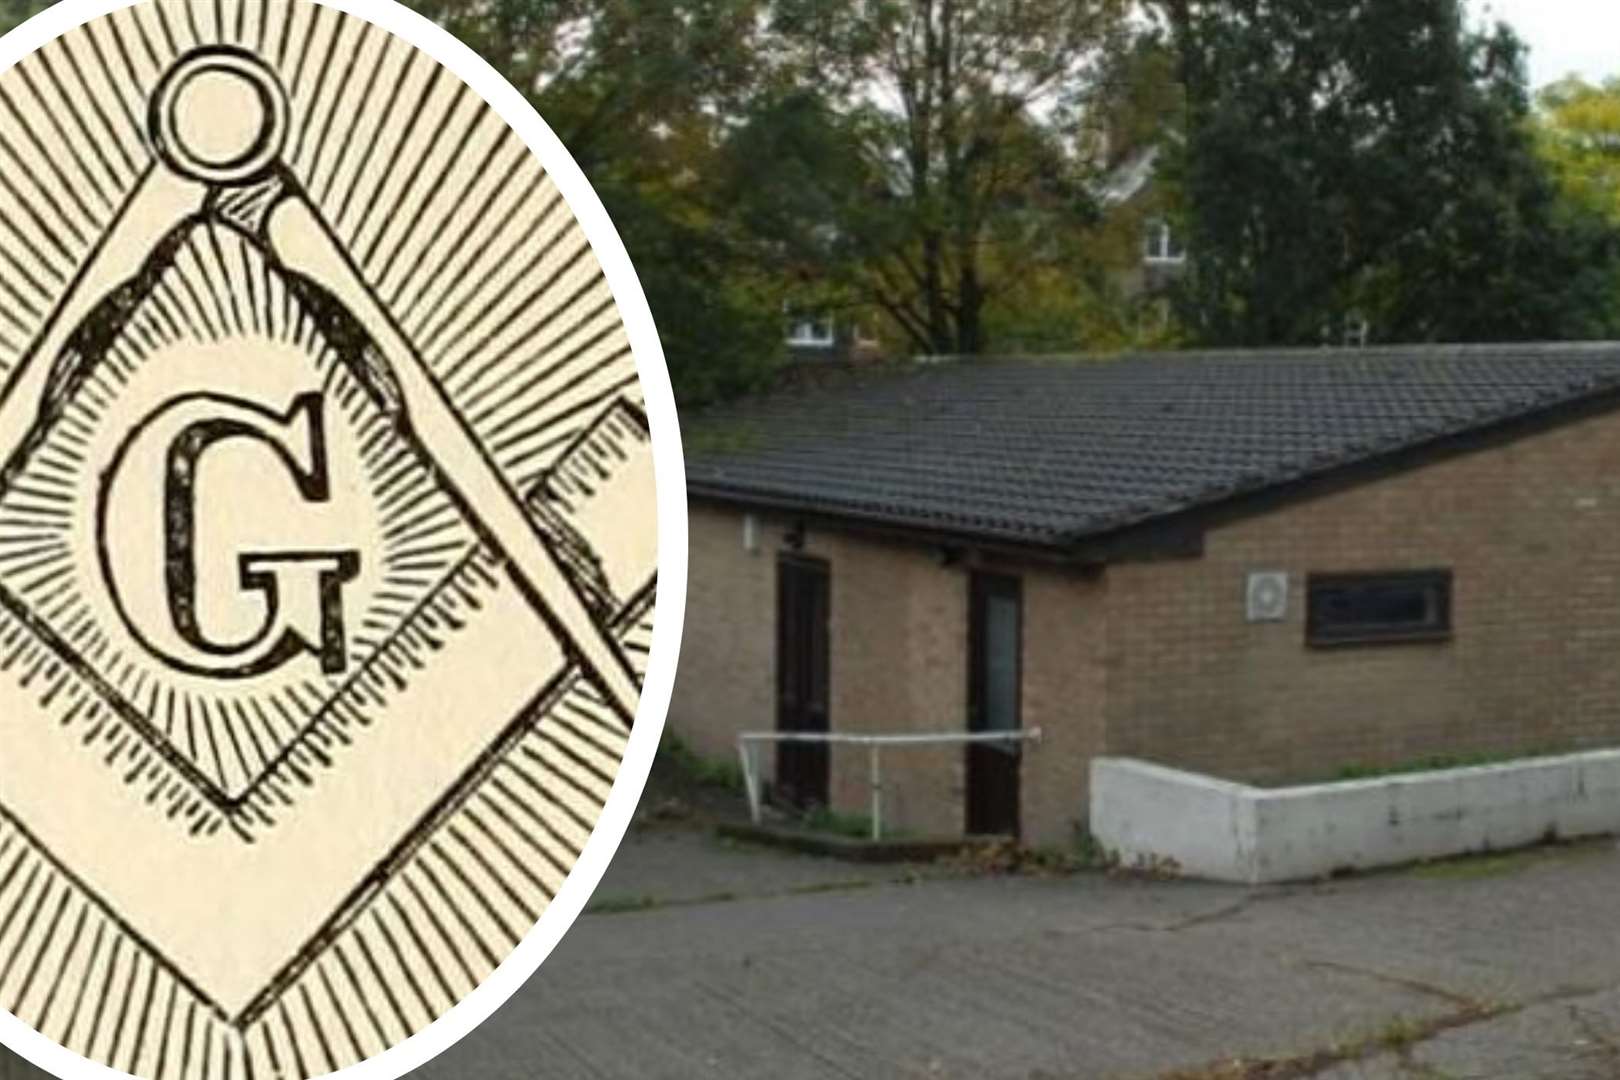 There are plans to expand a masonic hall